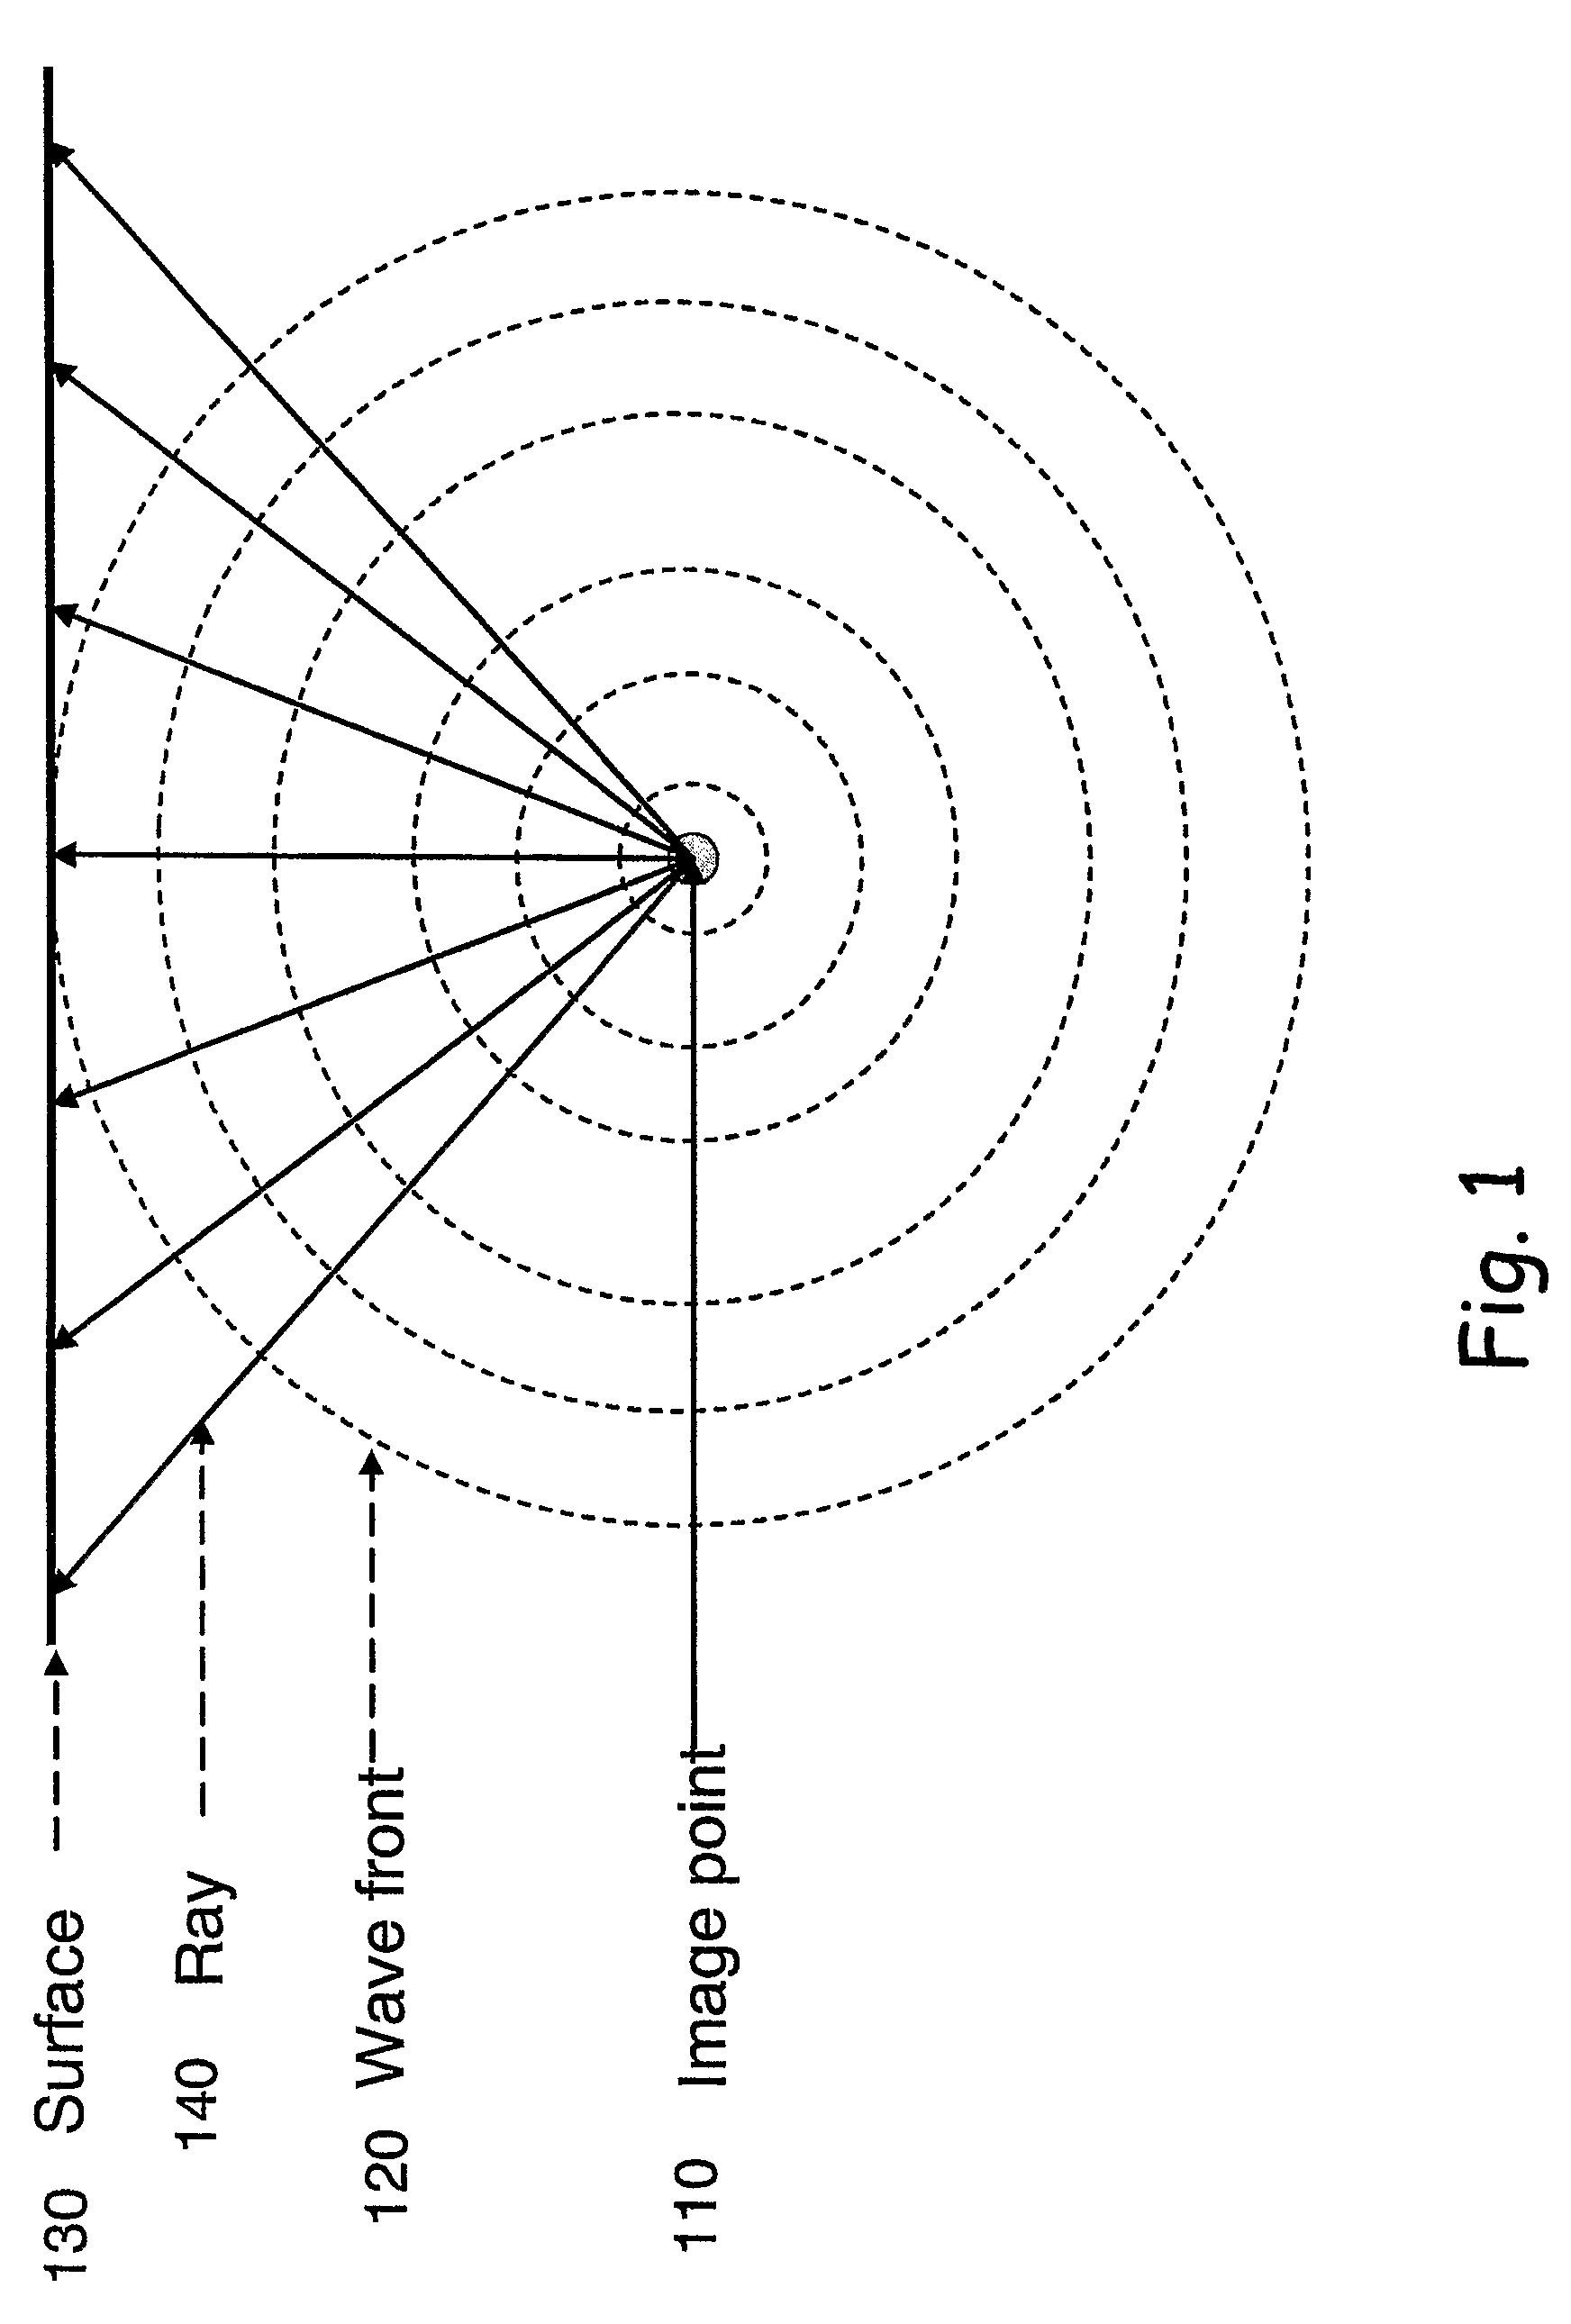 Method for identifying and analyzing faults/fractures using reflected and diffracted waves